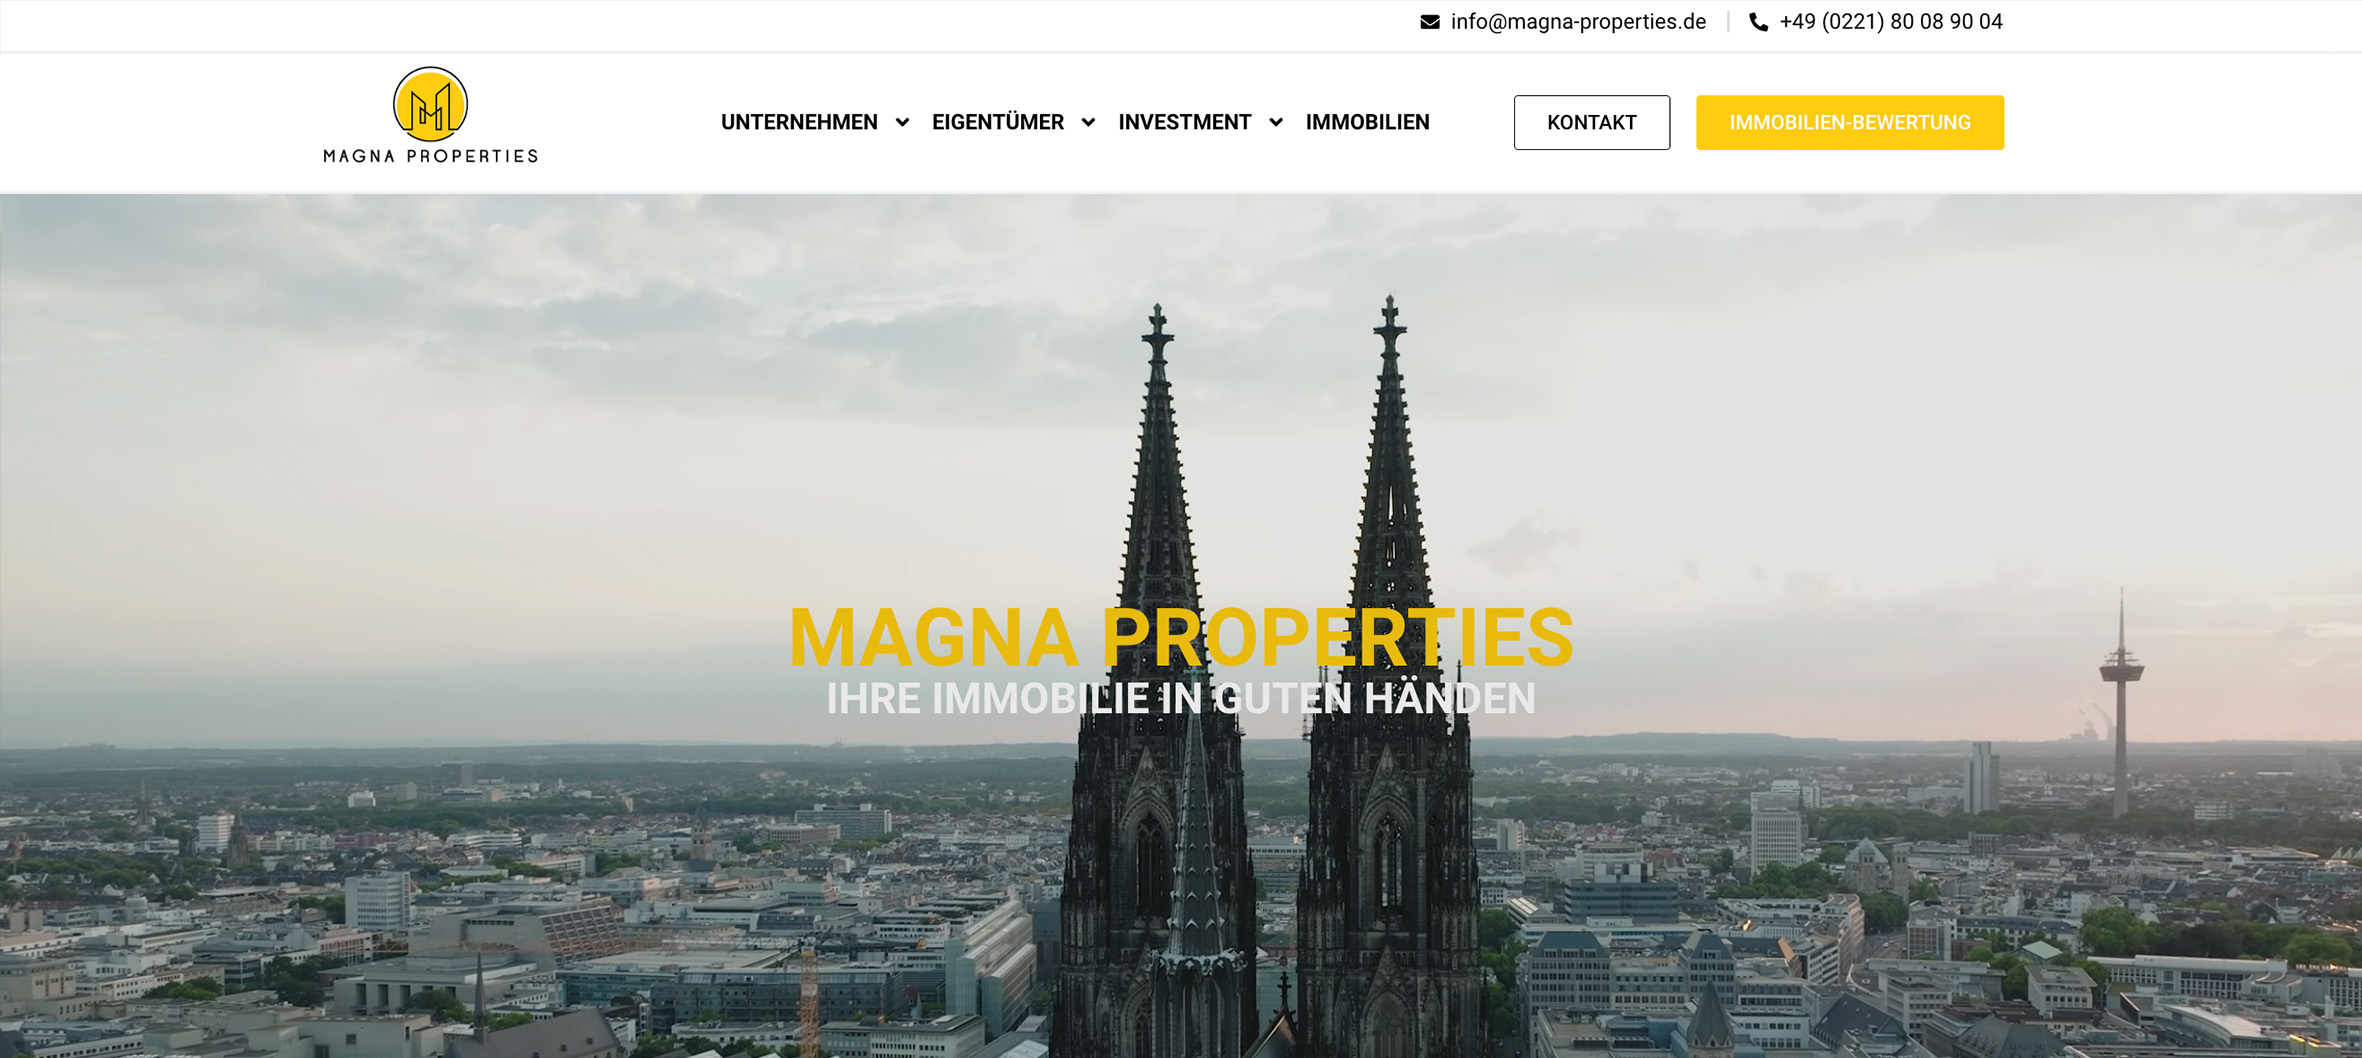 immobilien_webseite